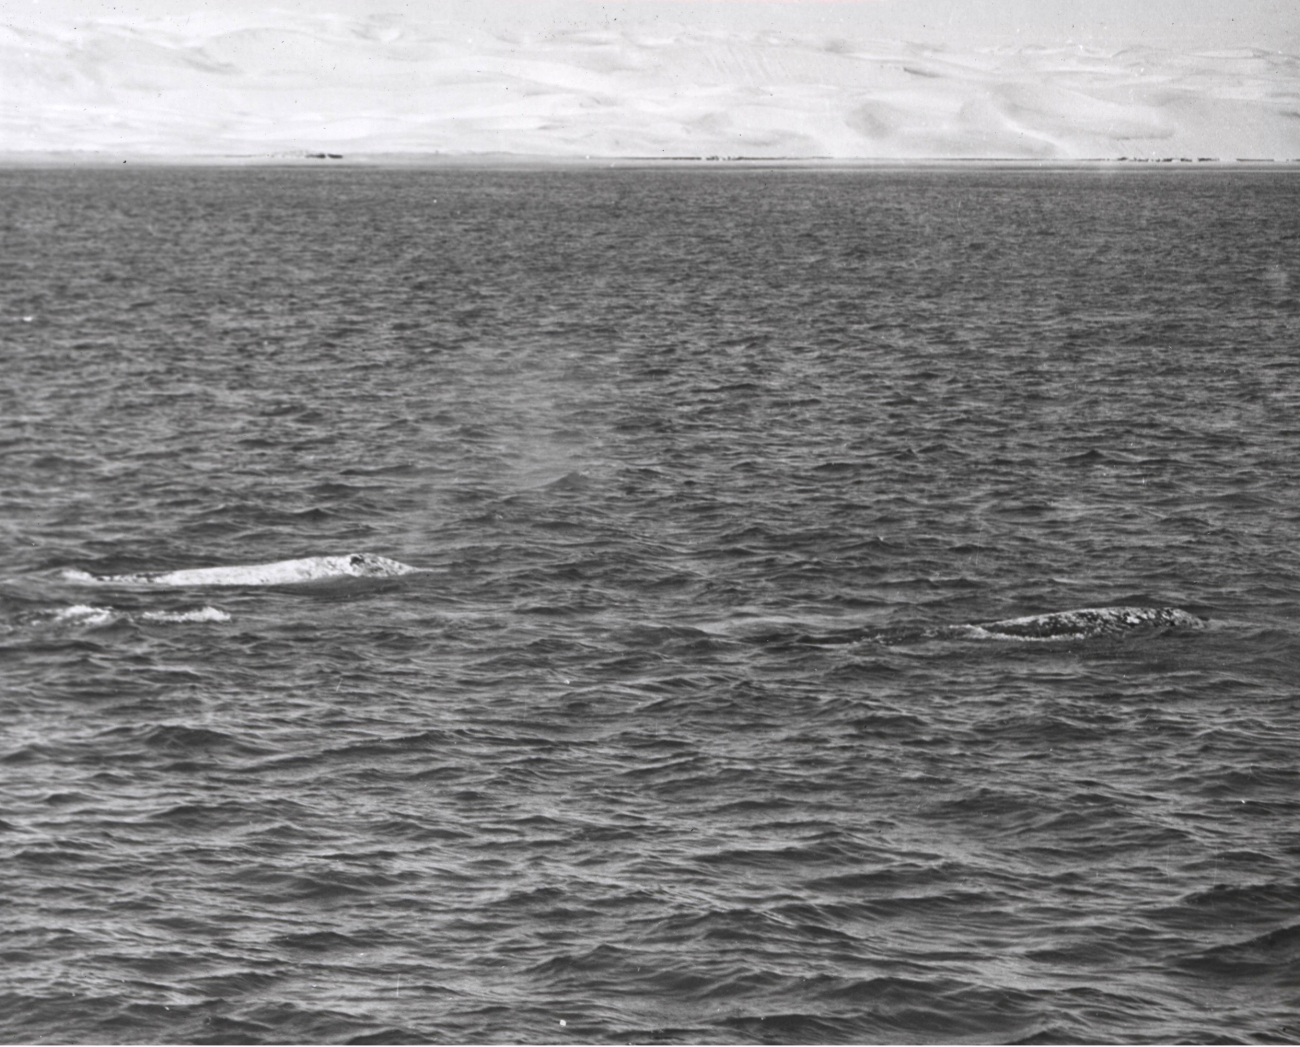 Three adult gray whales, probably two males and one female, meandering alongin social group preparatory to mating activities